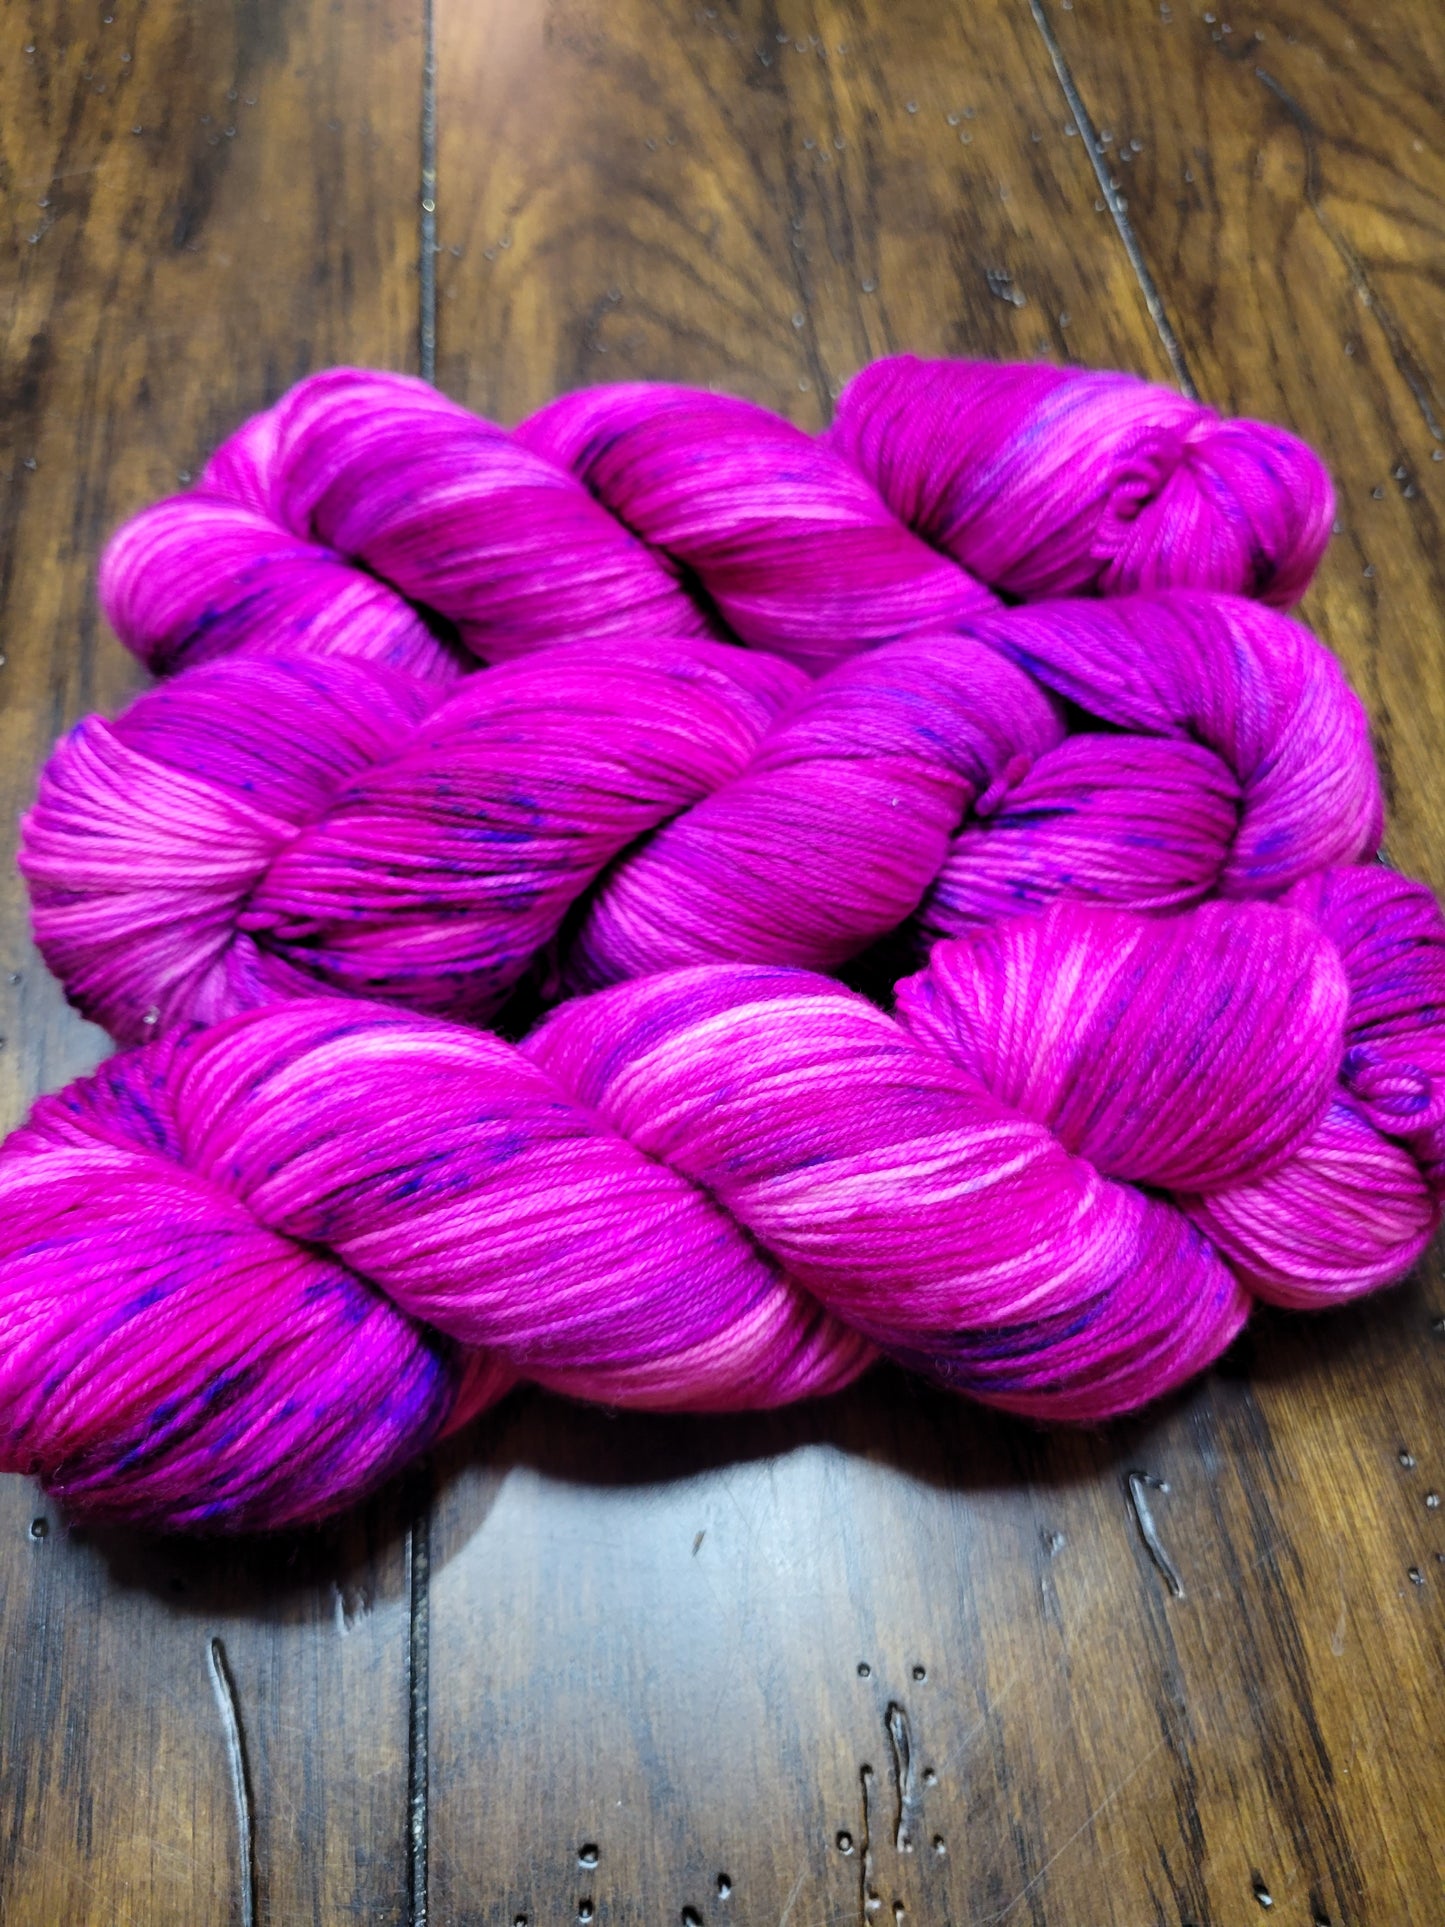 Hand Dyed Yarn - Cheshire Grin